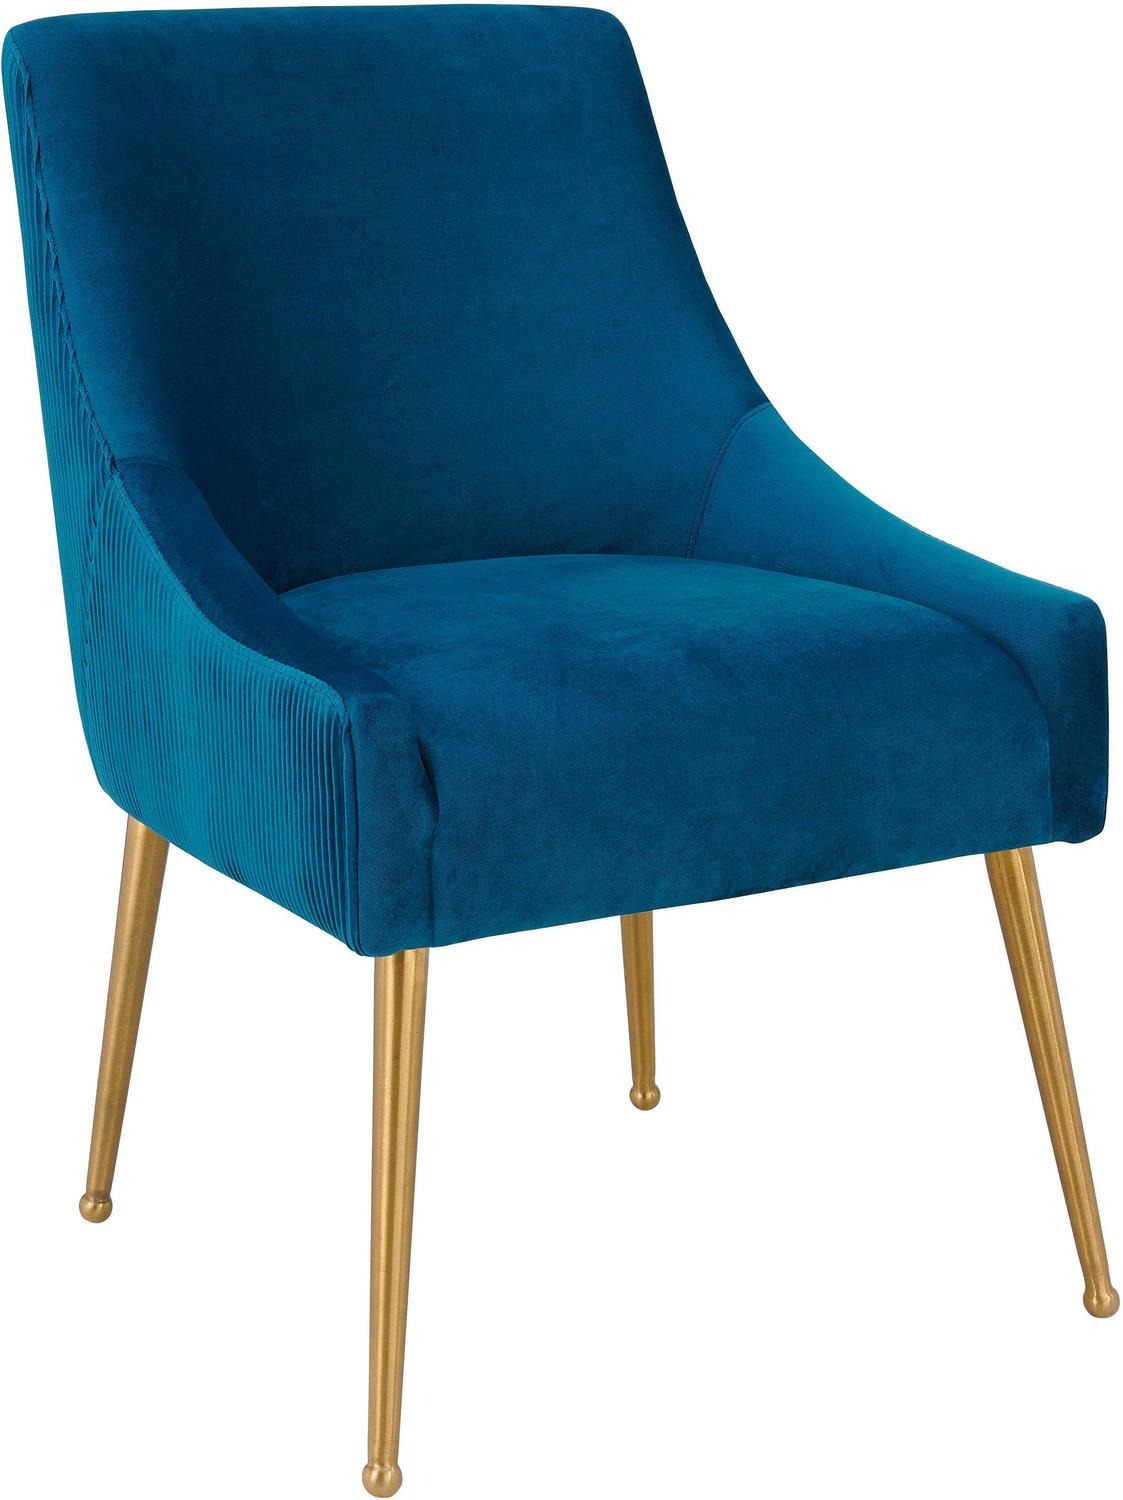 Tov Furniture Dining Chairs Chairs Navy